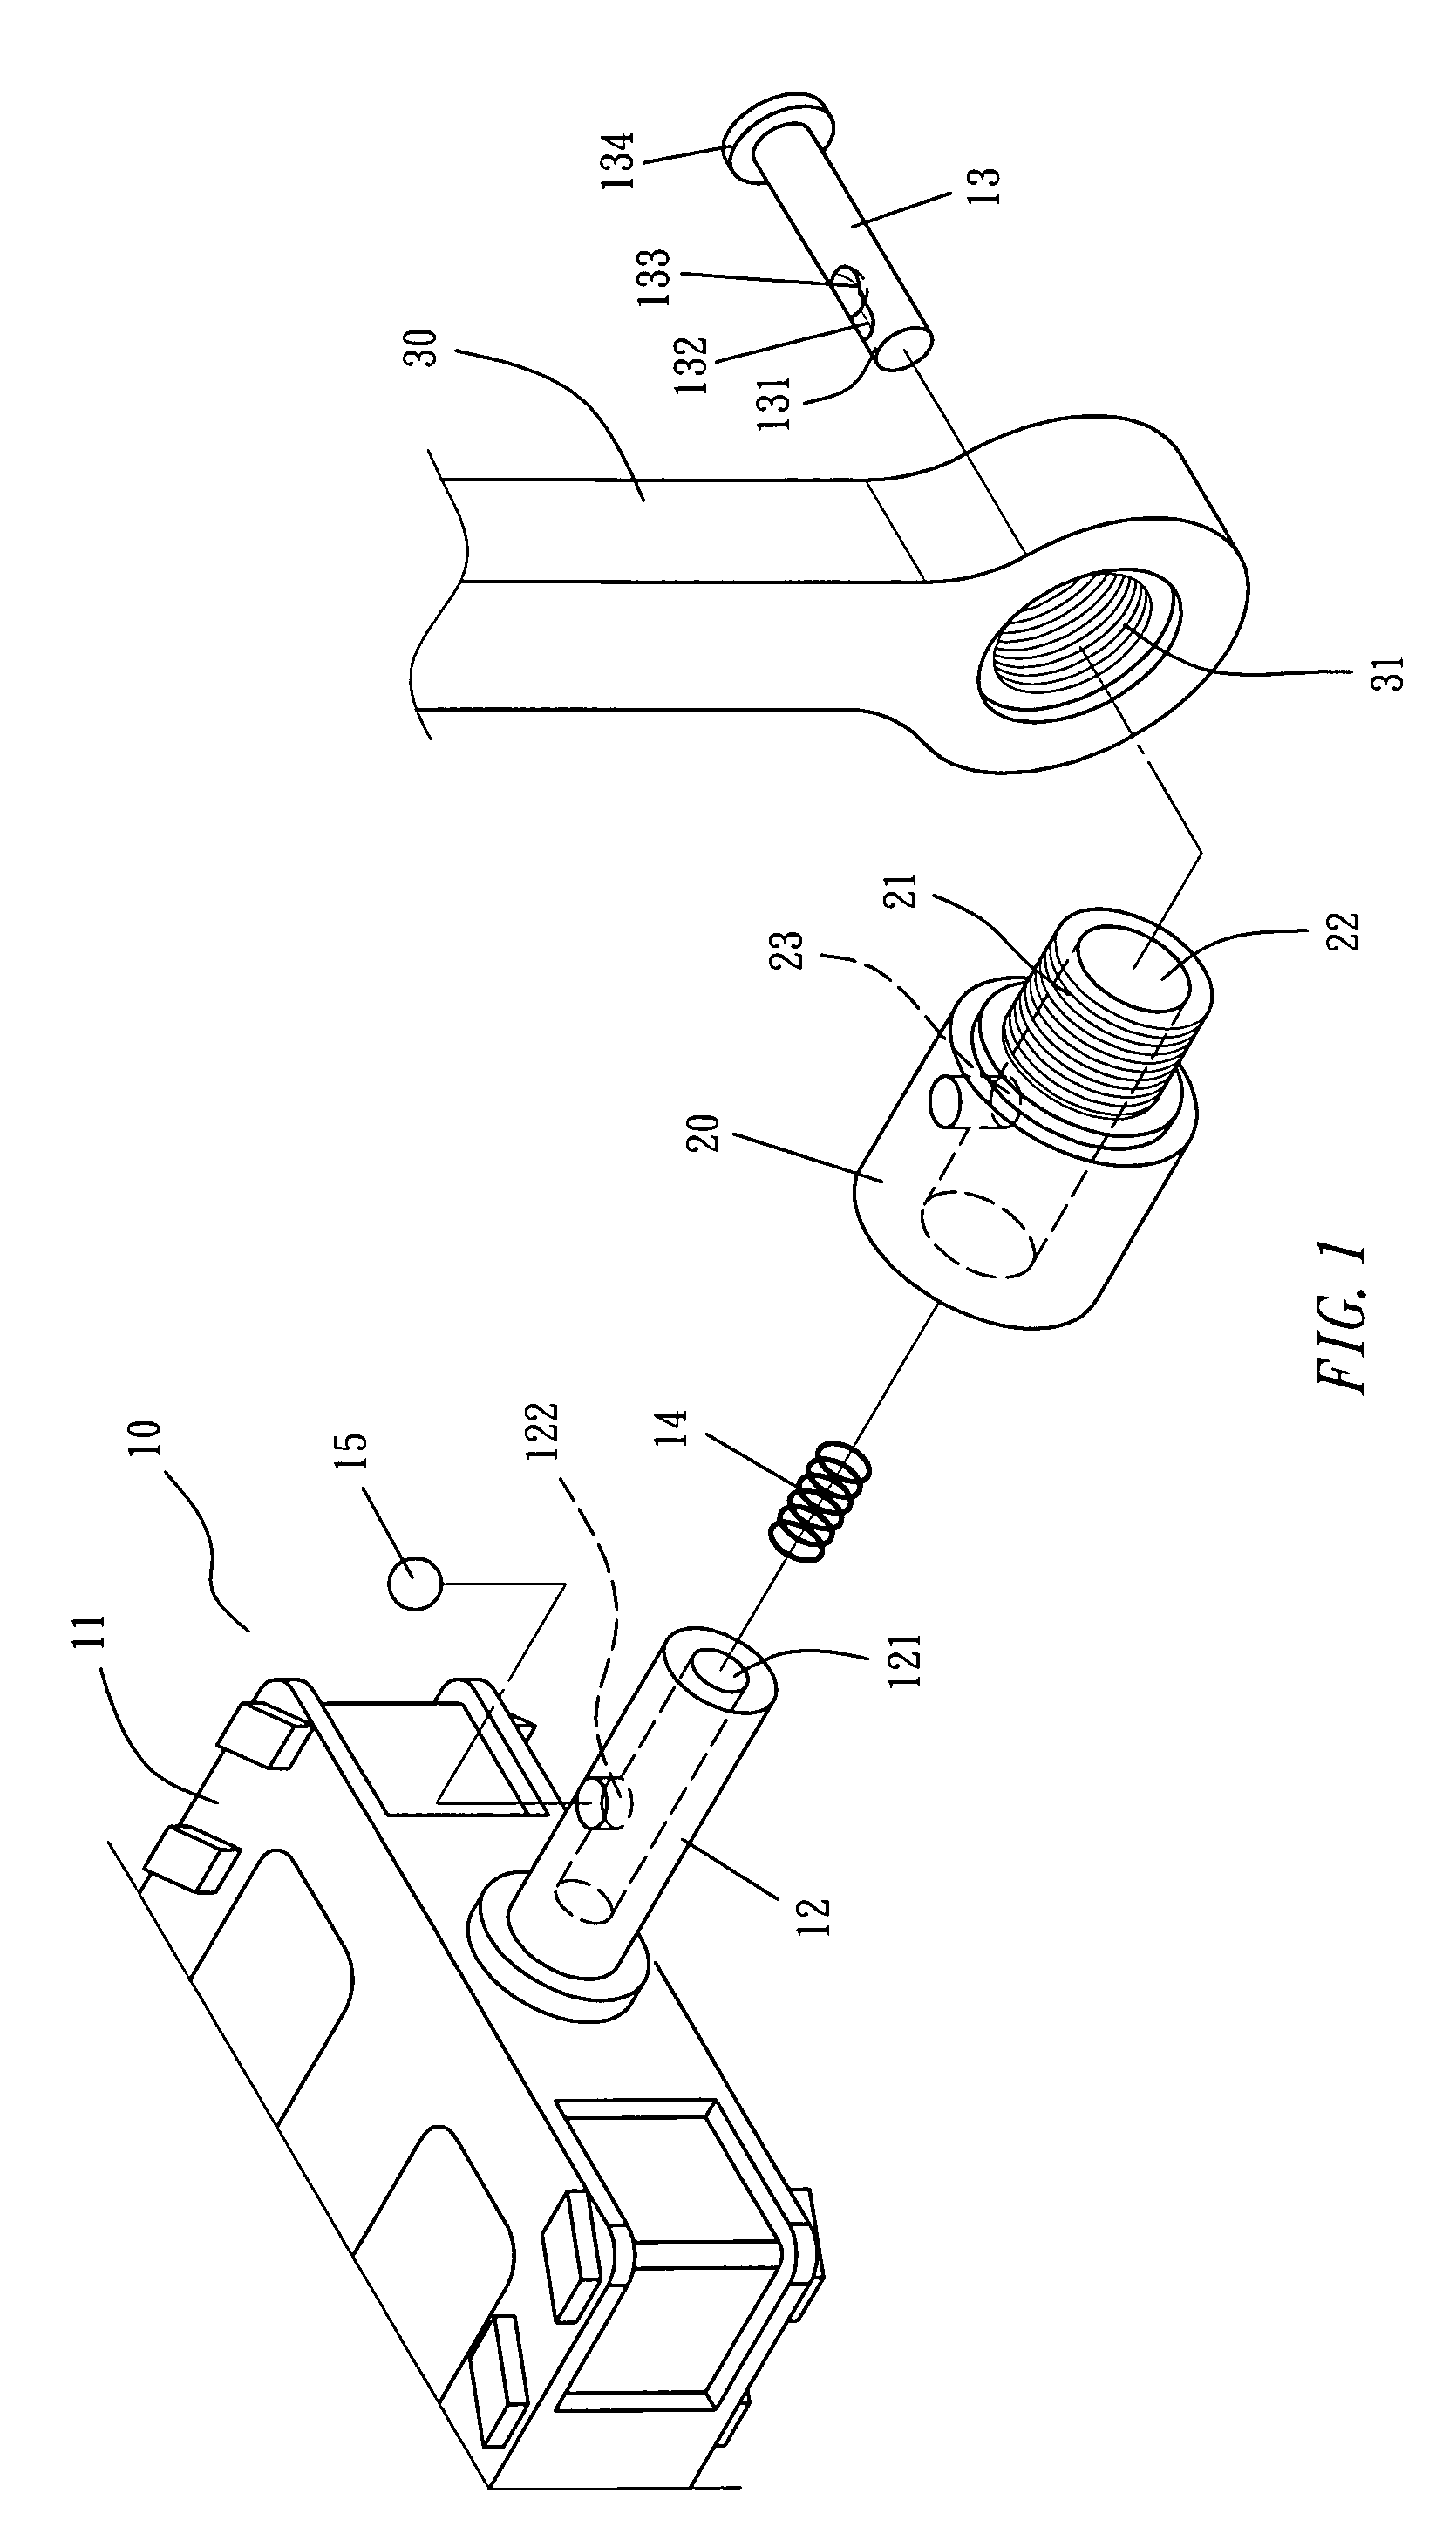 Bike pedal assembly structure